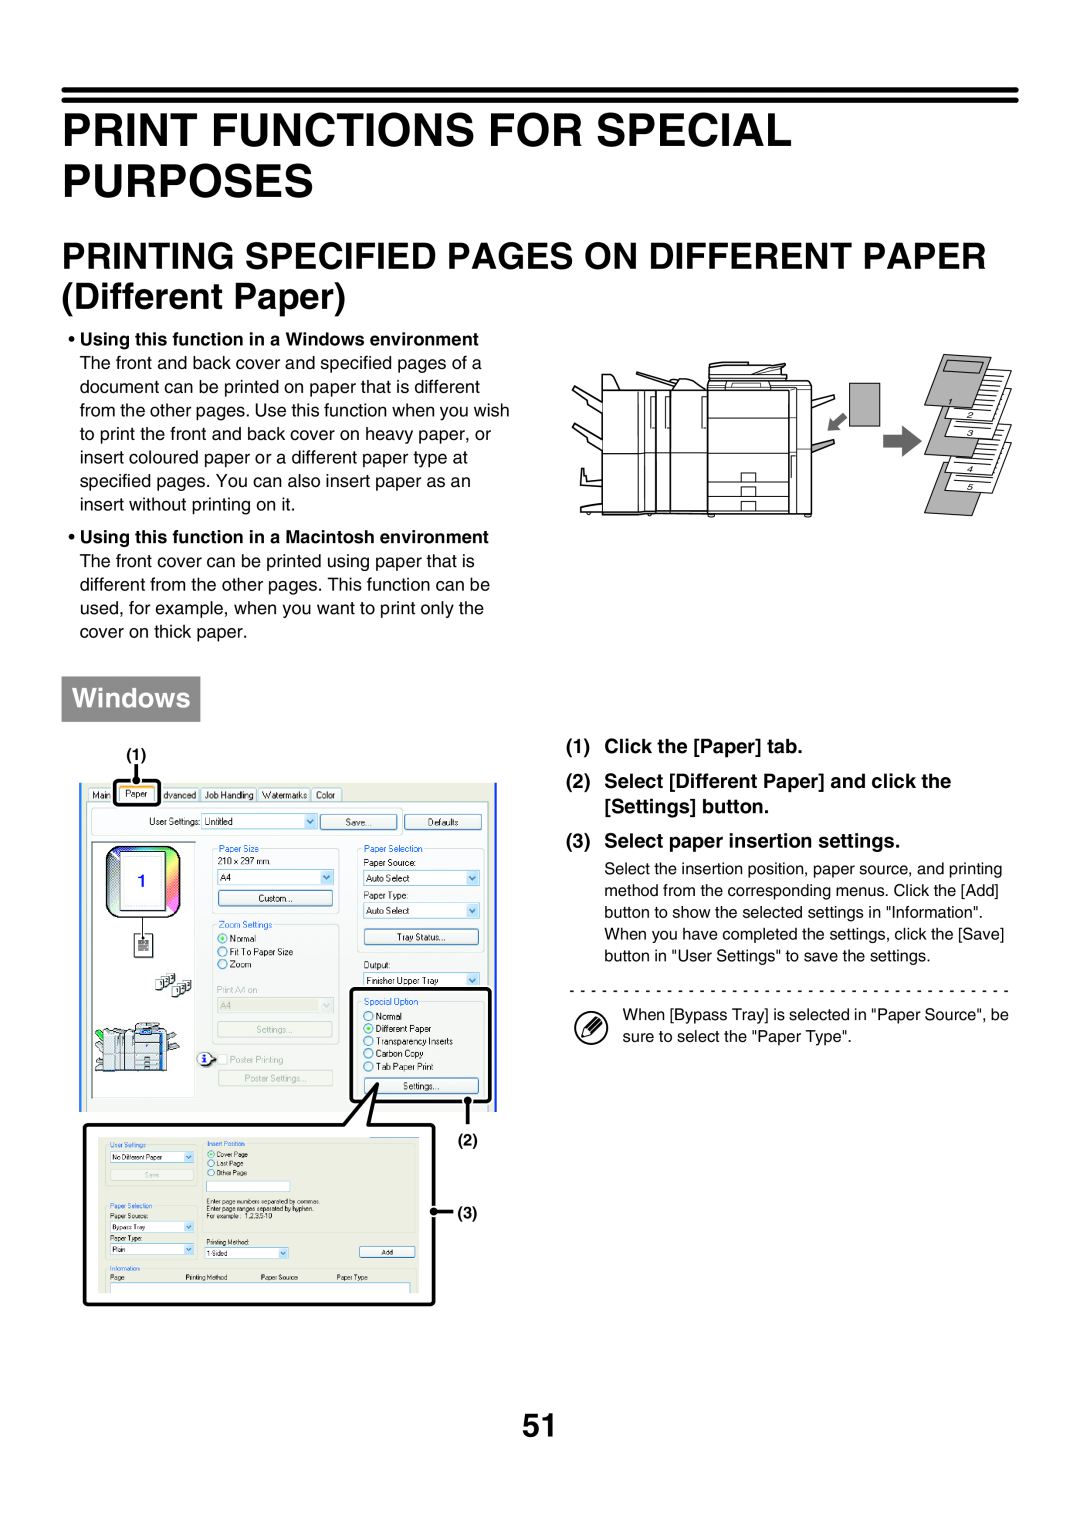 Sharp MX-6200N Print Functions For Special Purposes, PRINTING SPECIFIED PAGES ON DIFFERENT PAPER Different Paper, Windows 